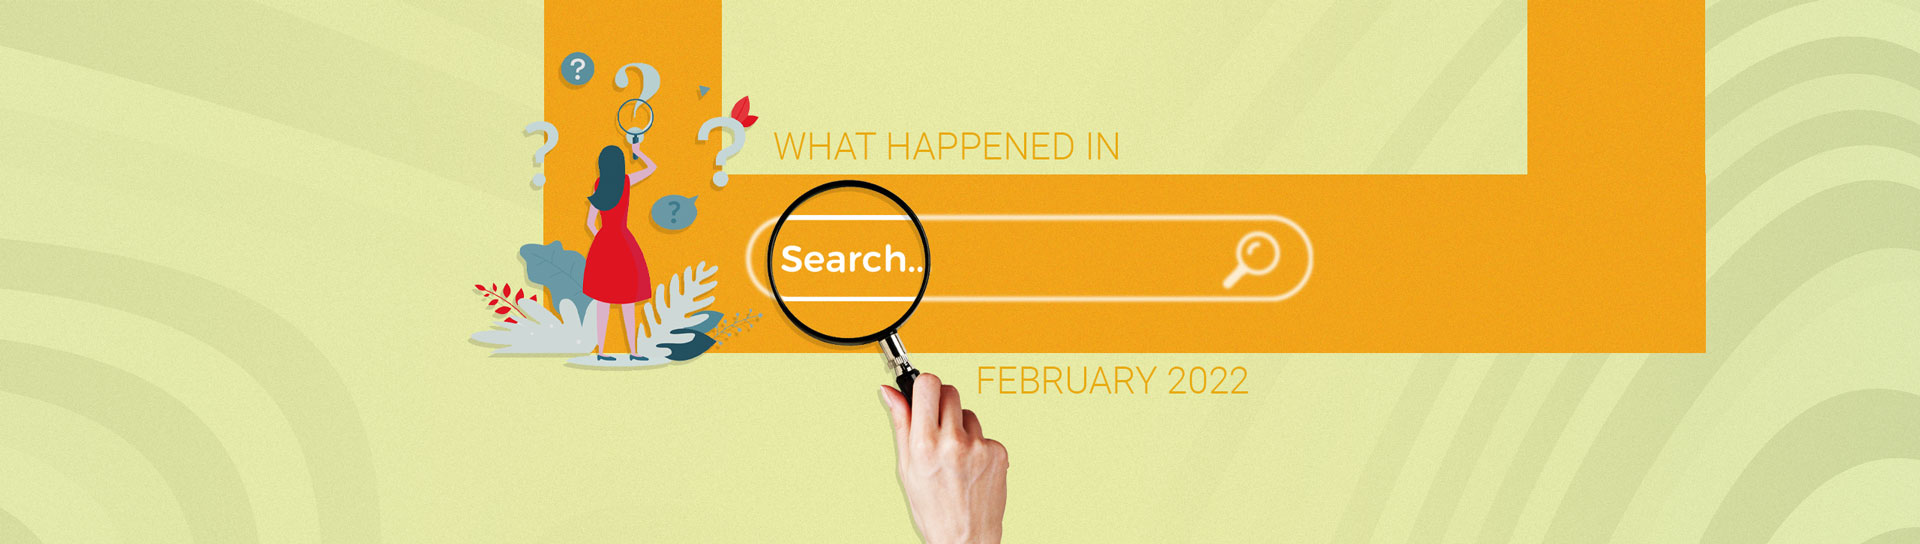 Google Search Updates – February ‘22 Changes